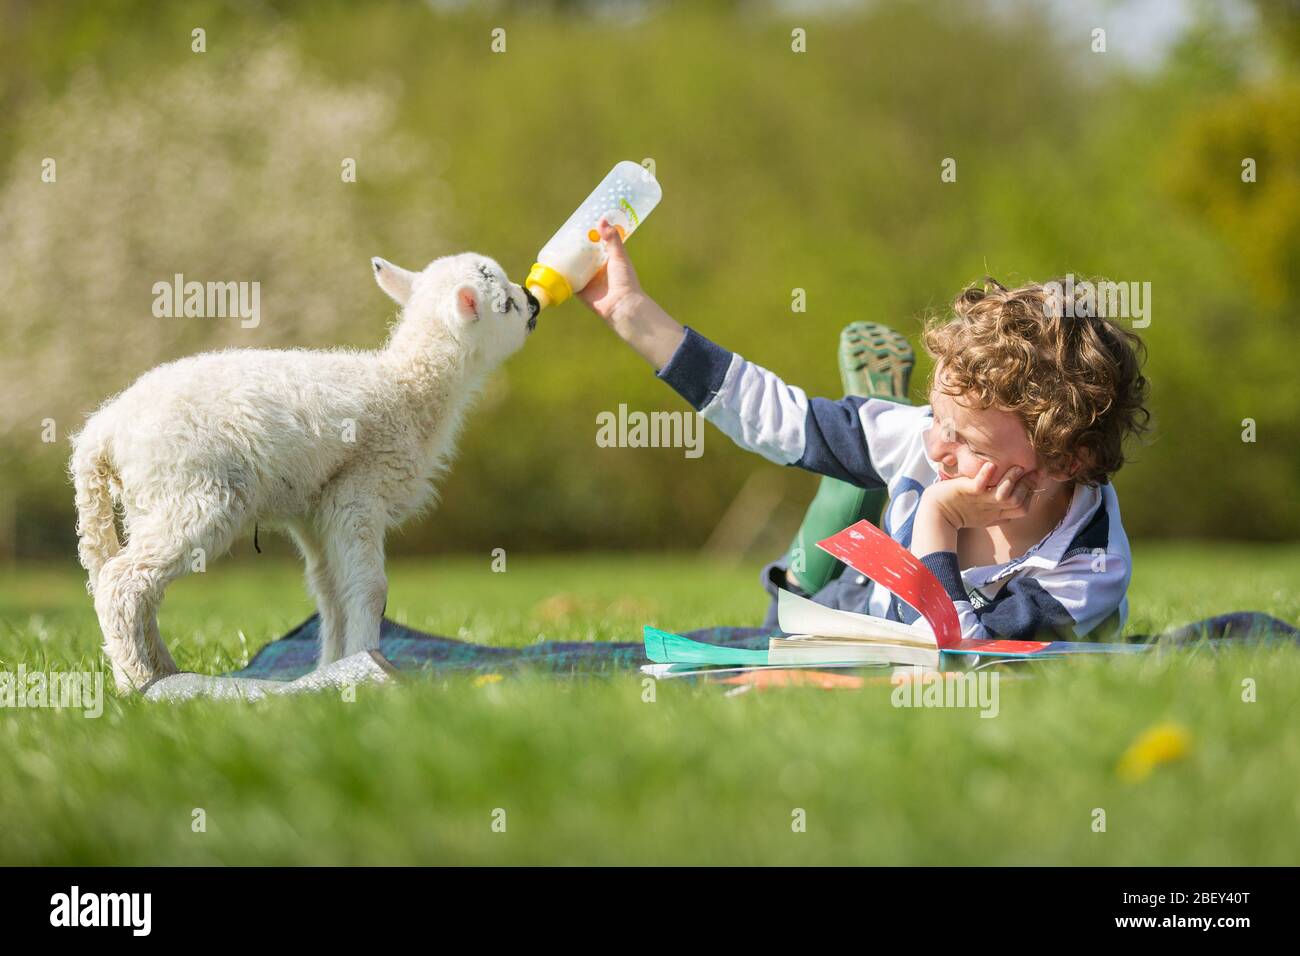 Arley, Worcestershire, UK. 16th Apr, 2020. While being 'homeschooled' during the COVID-19 lockdown, things can get difficult if a five-day-old lamb demands feeding. 6-year-old Henley Mills on his parents' farm in Arley, Worcestershire, tries to combine feeding Martha the lamb with doing some essential home school reading. [Note: photographed with full compliance with current government social distancing regulations] Credit: Peter Lopeman/Alamy Live News Stock Photo